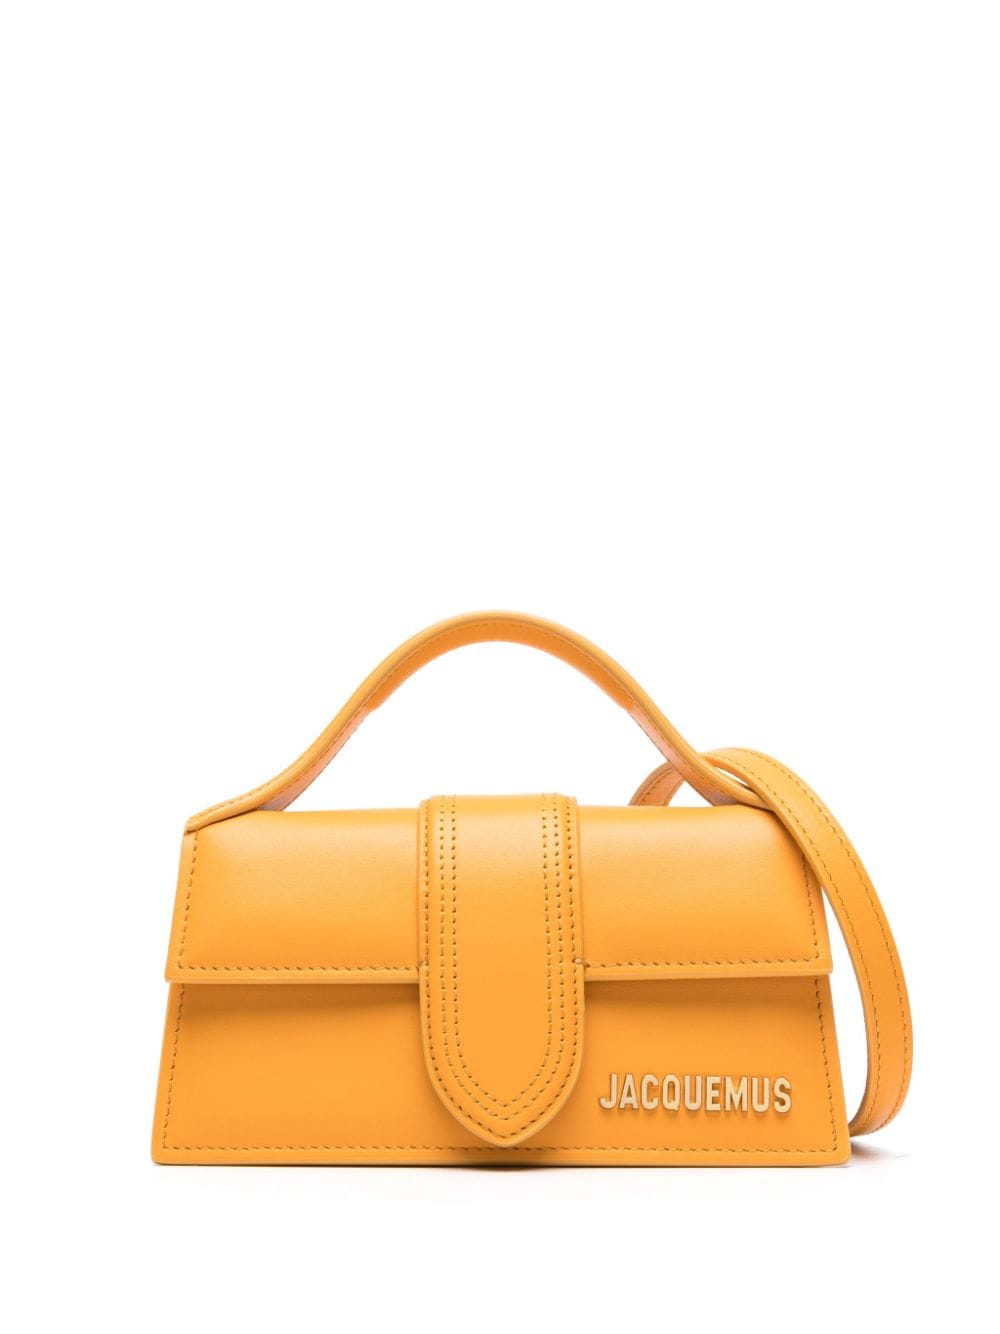 Jacquemus Amber Yellow Leather Foldover Bag With Gold-tone Hardware In Orange